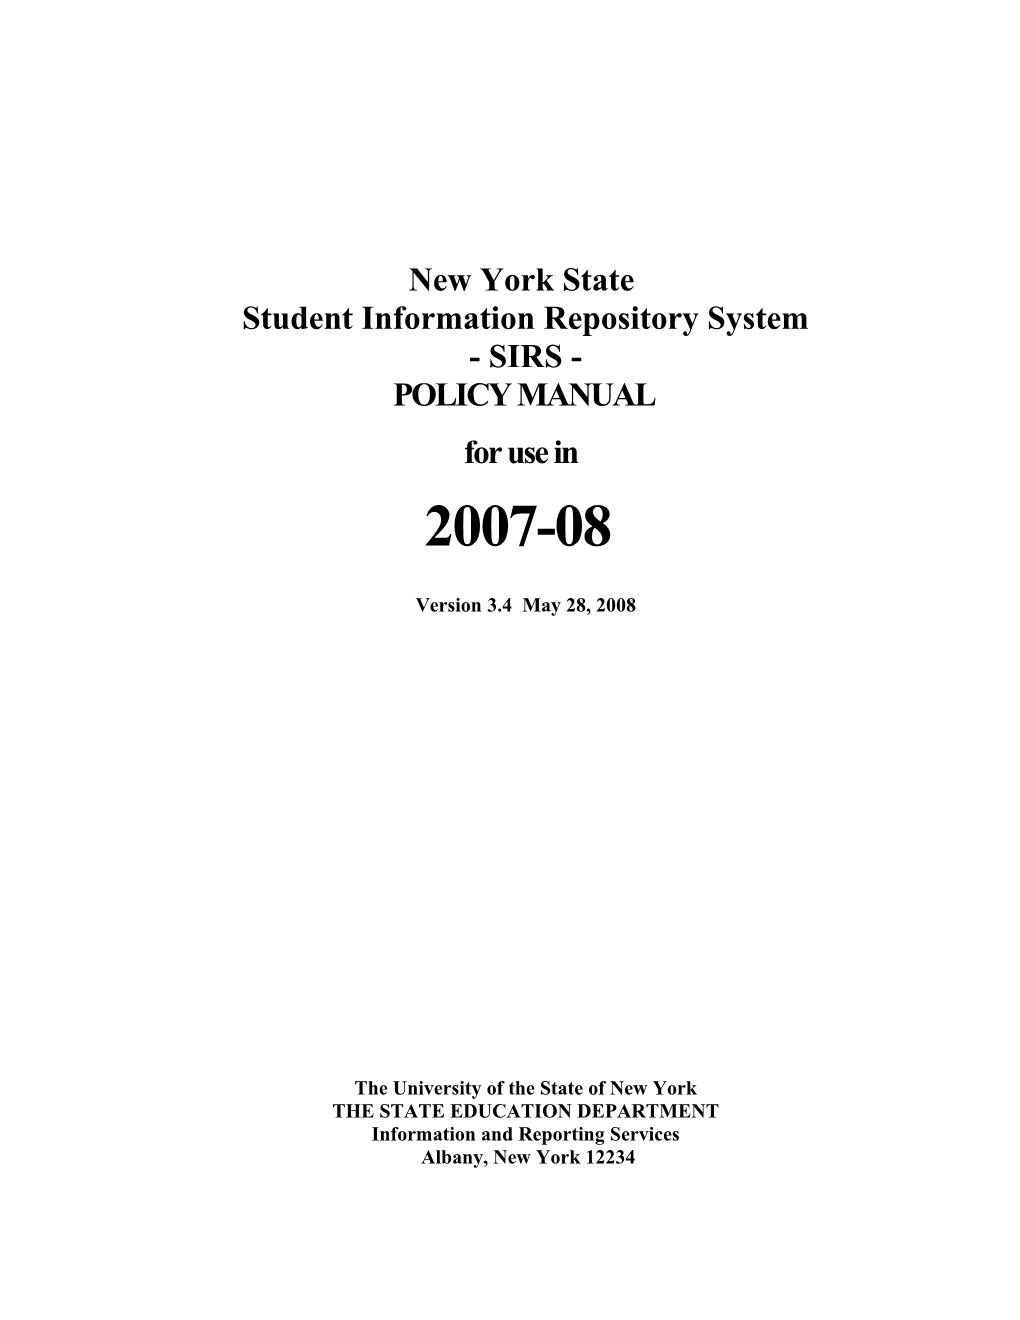 Student Repository System